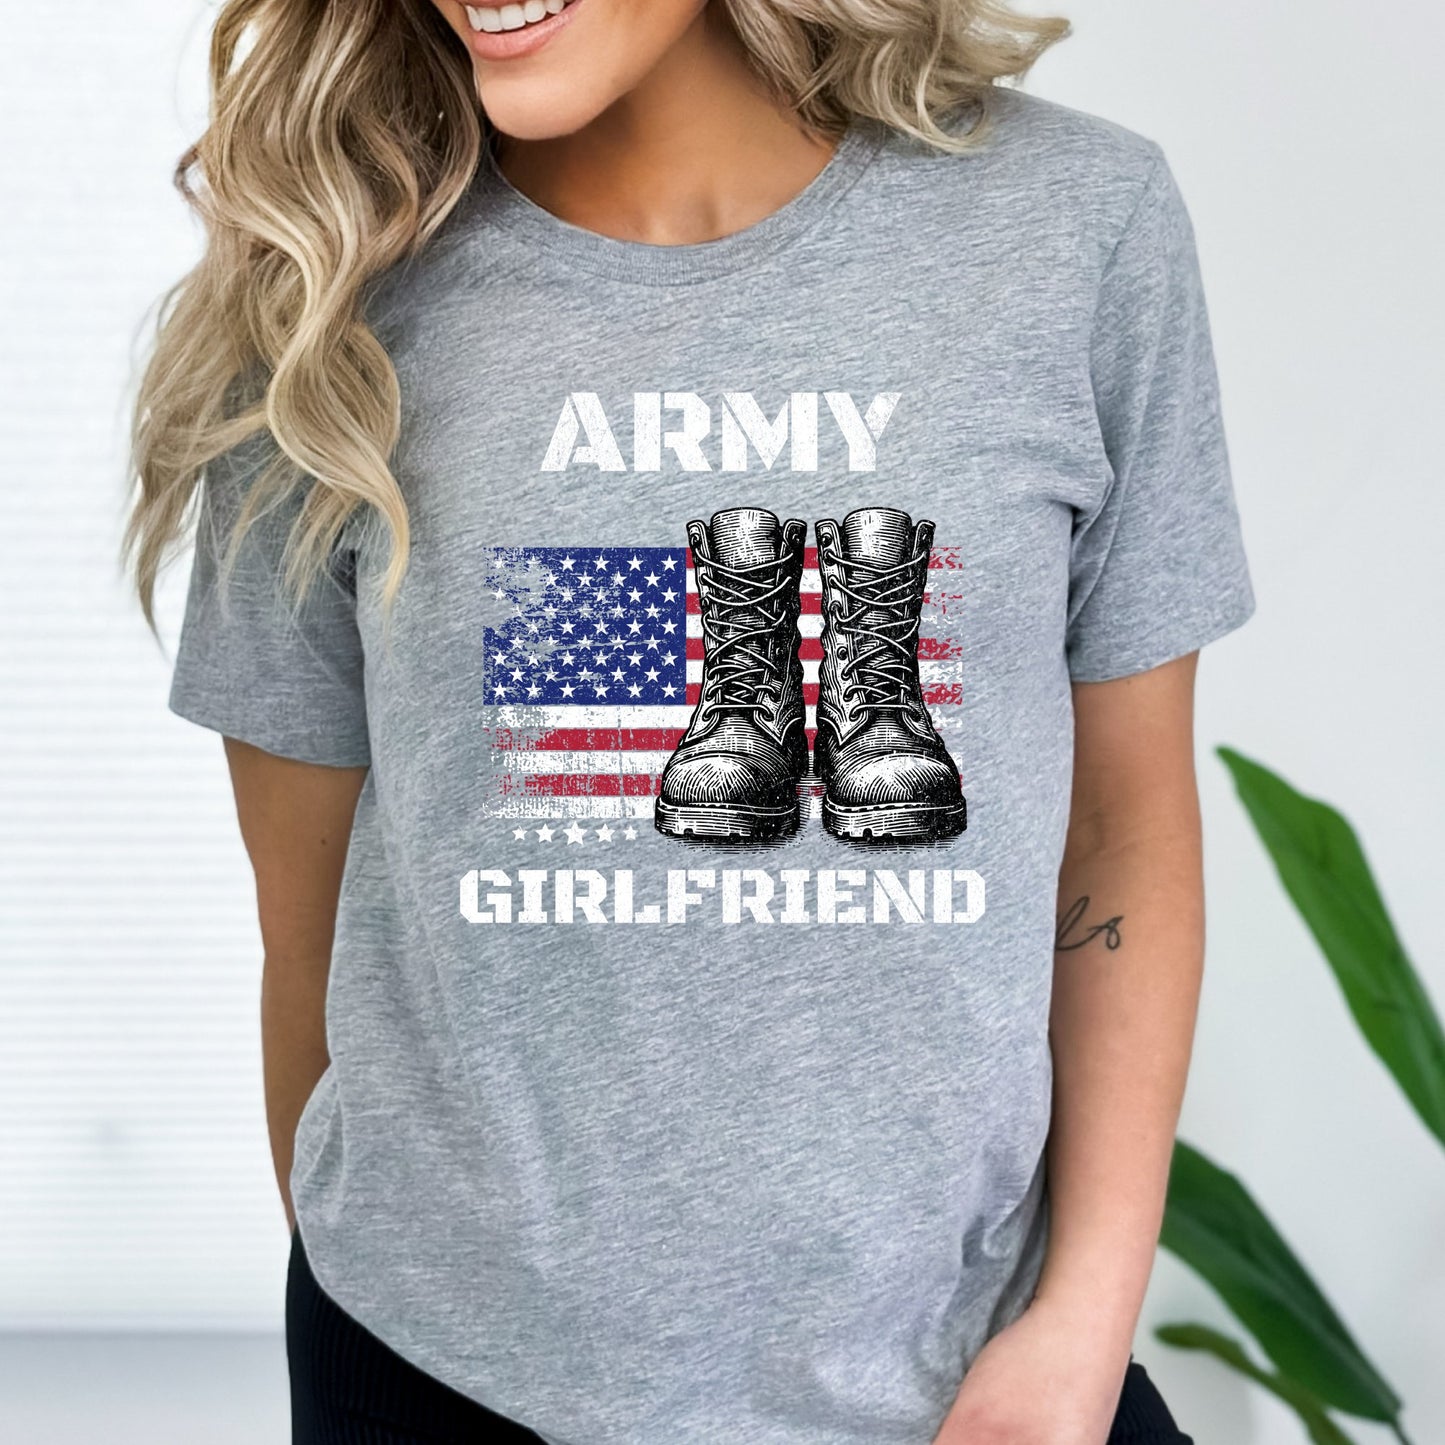 Army Girlfriend Vintage American Flag and Boots T-Shirt, Patriotic Military Shirt - Mardonyx T-Shirt XS / Athletic Heather